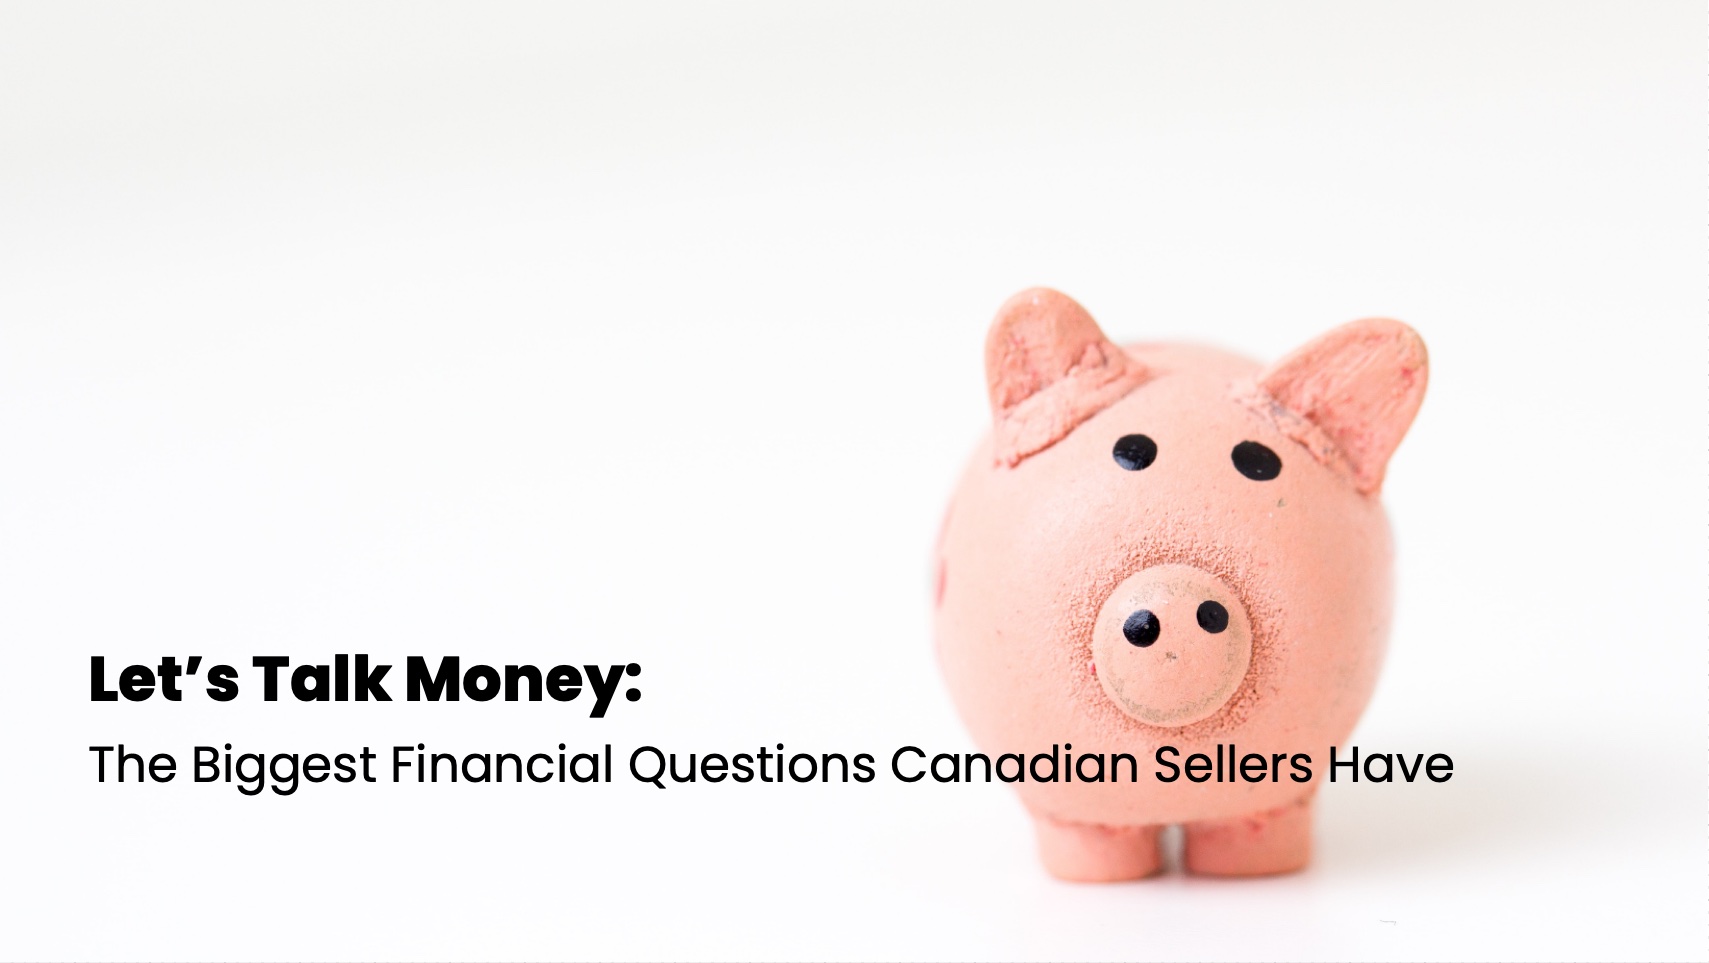 Let’s Talk Money: The Biggest Financial Questions Canadian Sellers Have